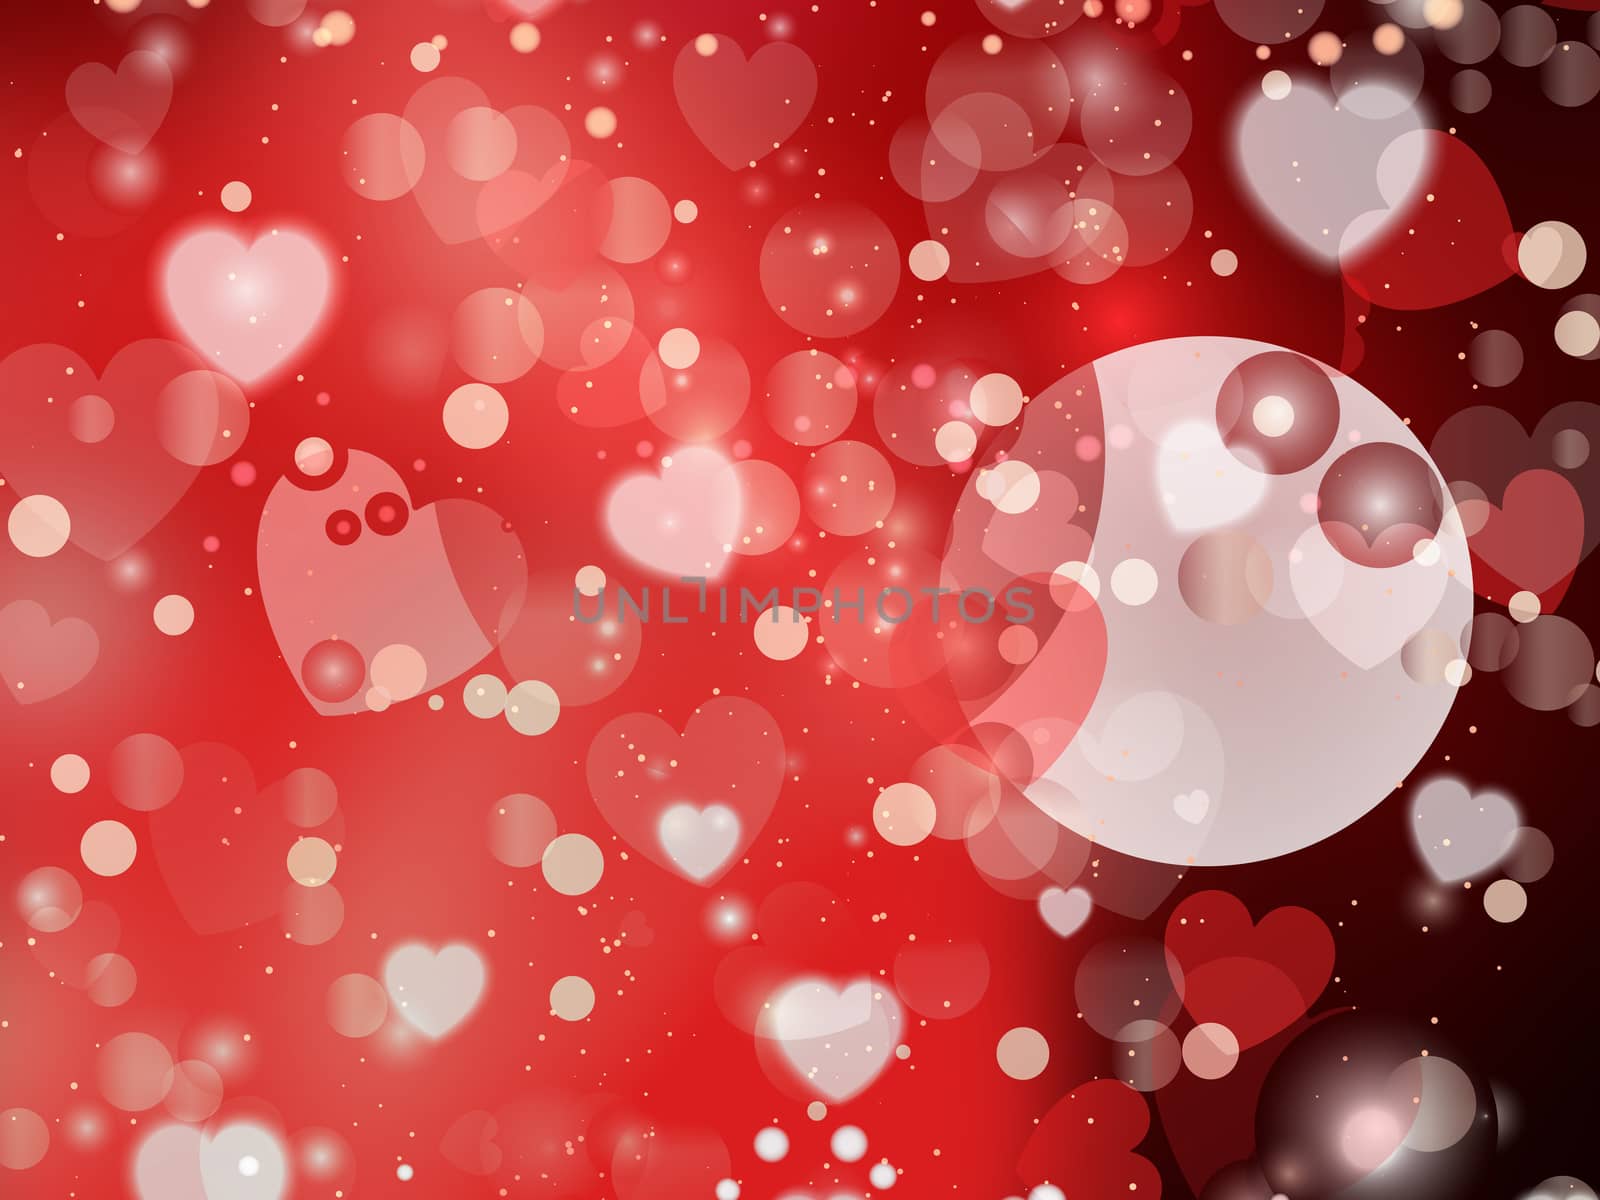 Heart blurred lights on colorfull background, Hearts texture bac by shaadjutt36